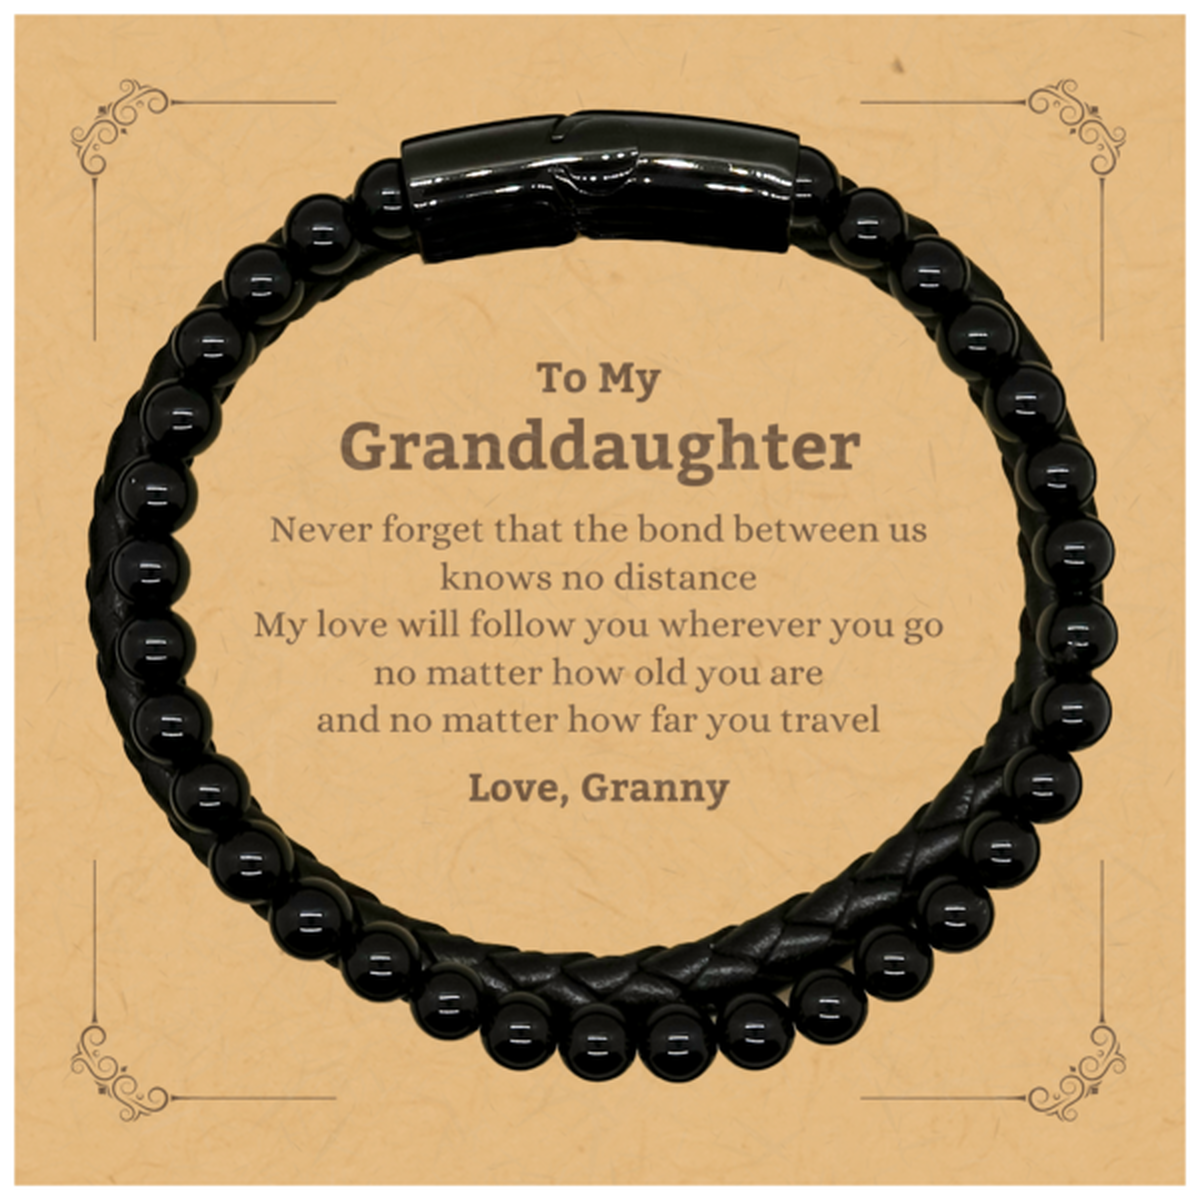 Granddaughter Birthday Gifts from Granny, Adjustable Stone Leather Bracelets for Granddaughter Christmas Graduation Unique Gifts Granddaughter Never forget that the bond between us knows no distance. Love, Granny